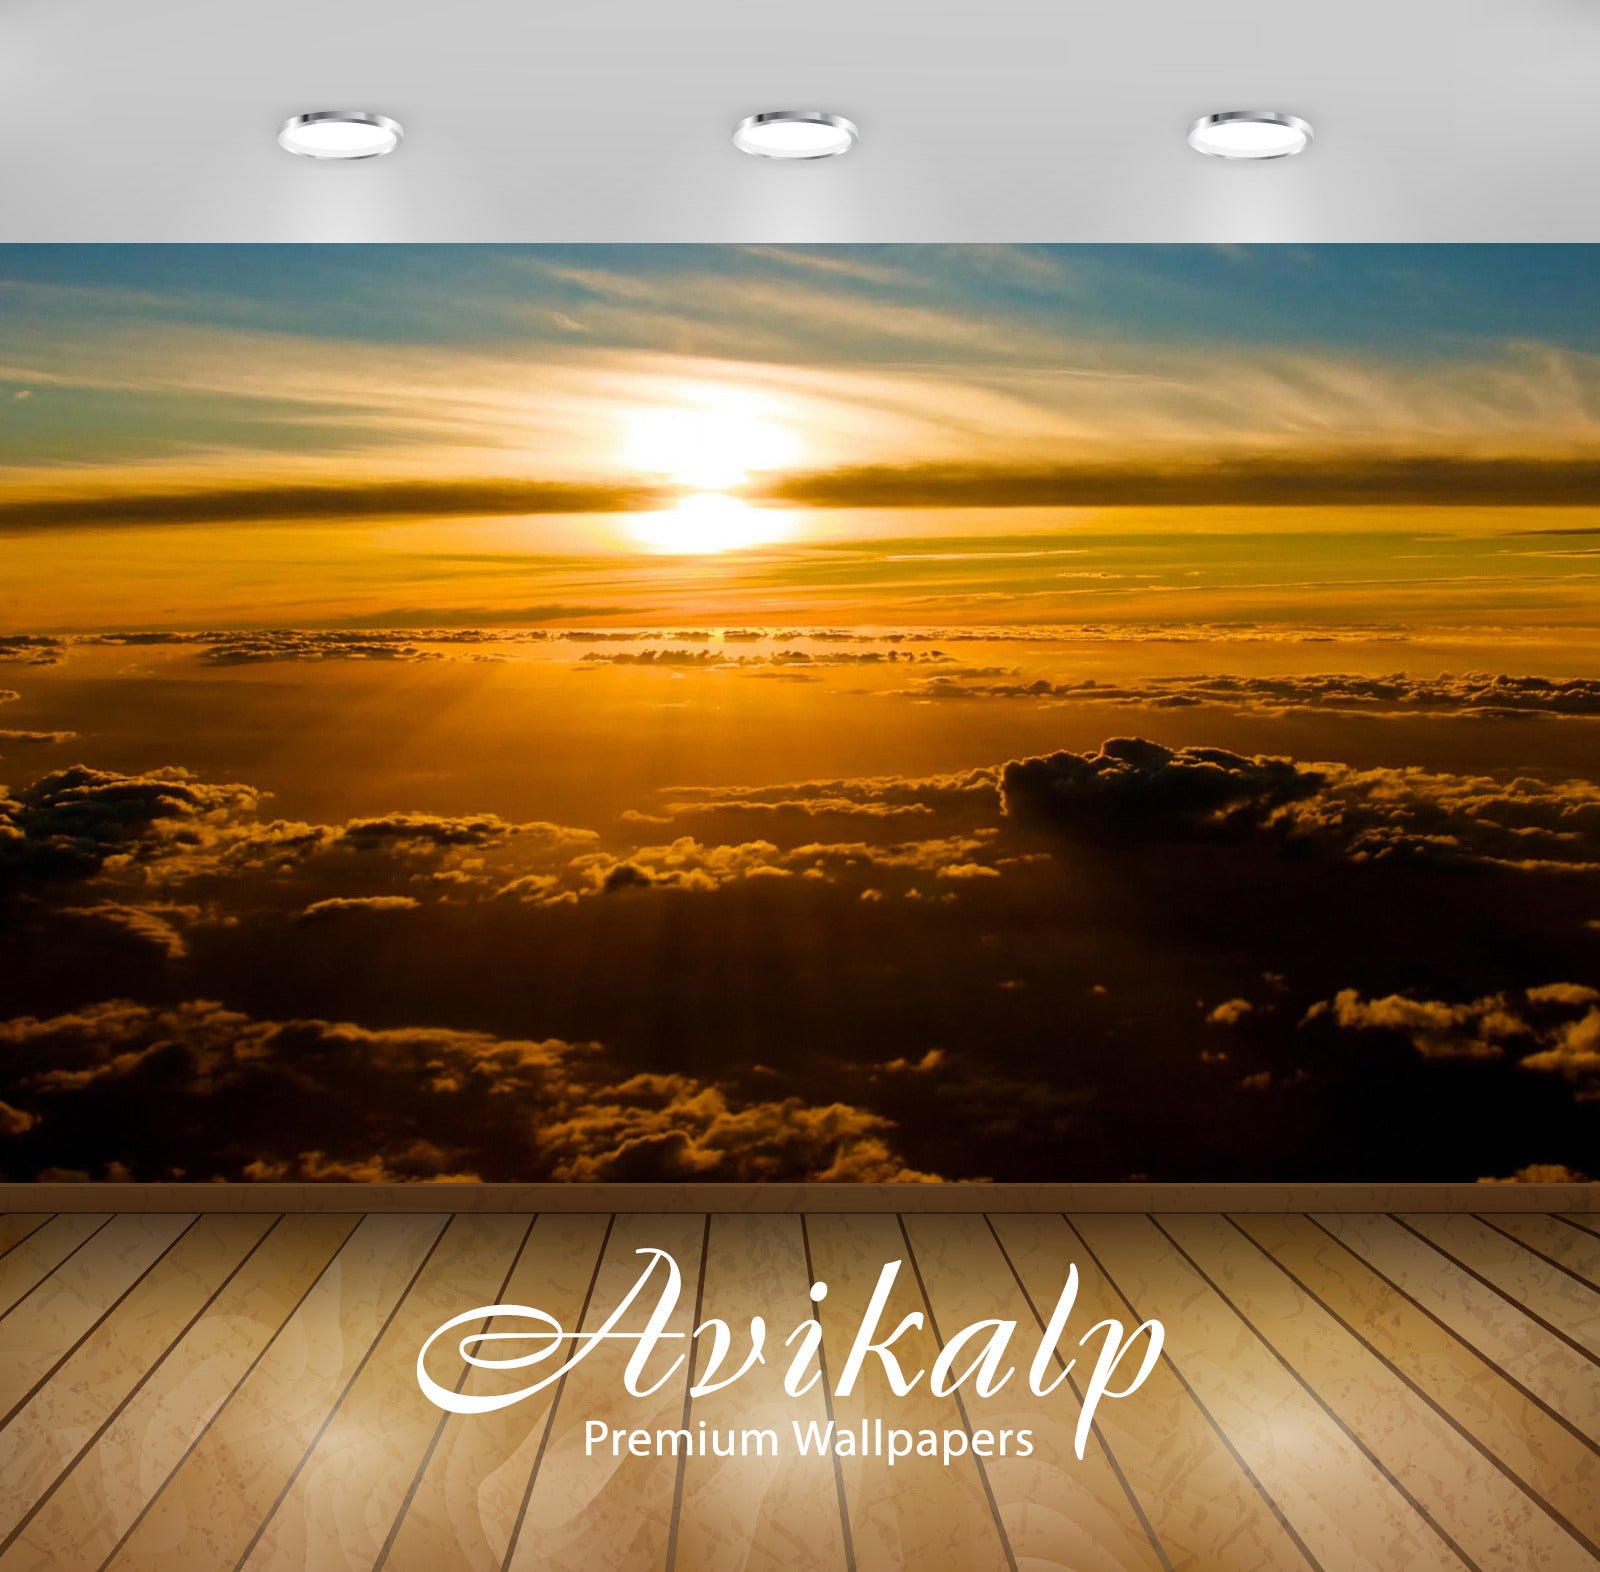 Avikalp Exclusive Awi6478 Sunset Above The Clouds Nature Full HD Wallpapers for Living room, Hall, K